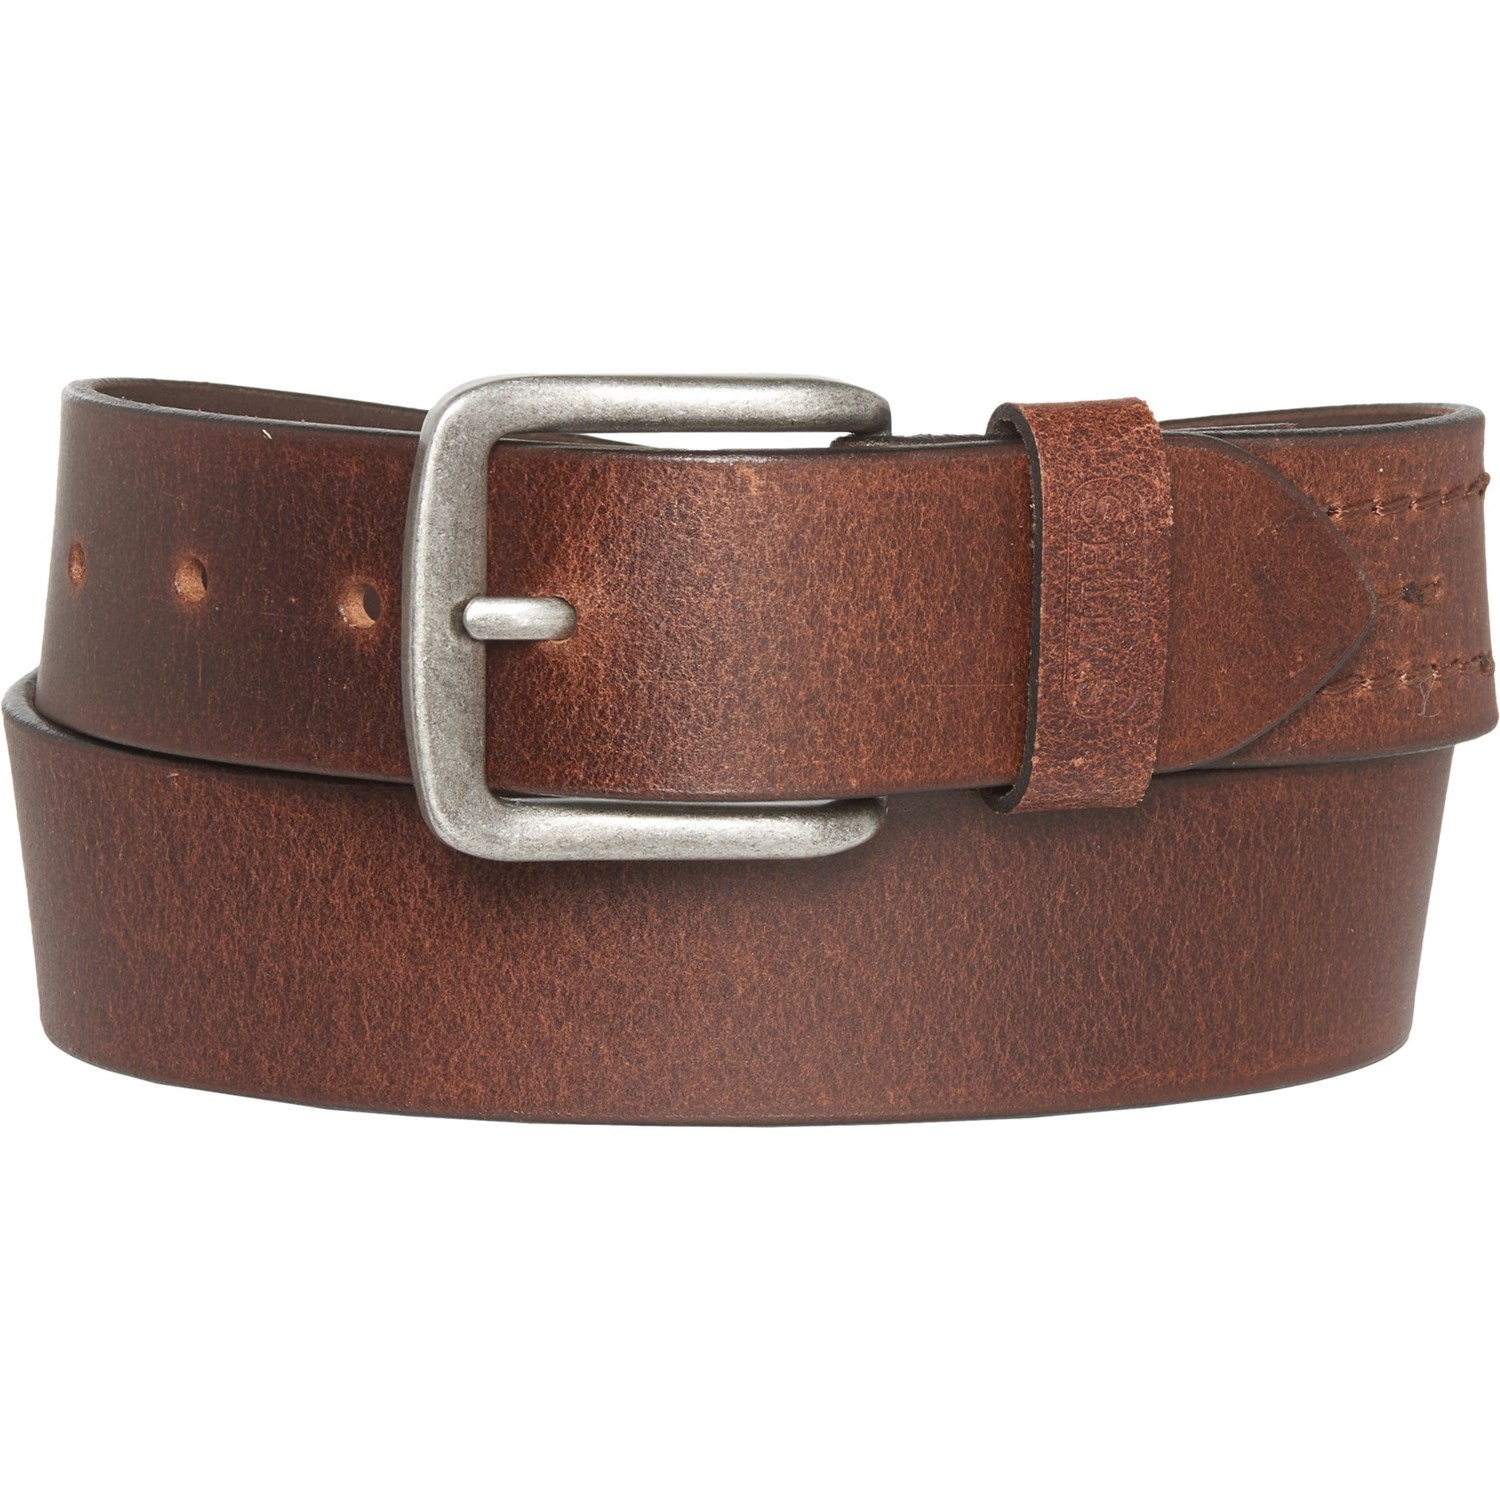 Smith's Workwear Stitched Strap Belt (For Men) - Save 35%